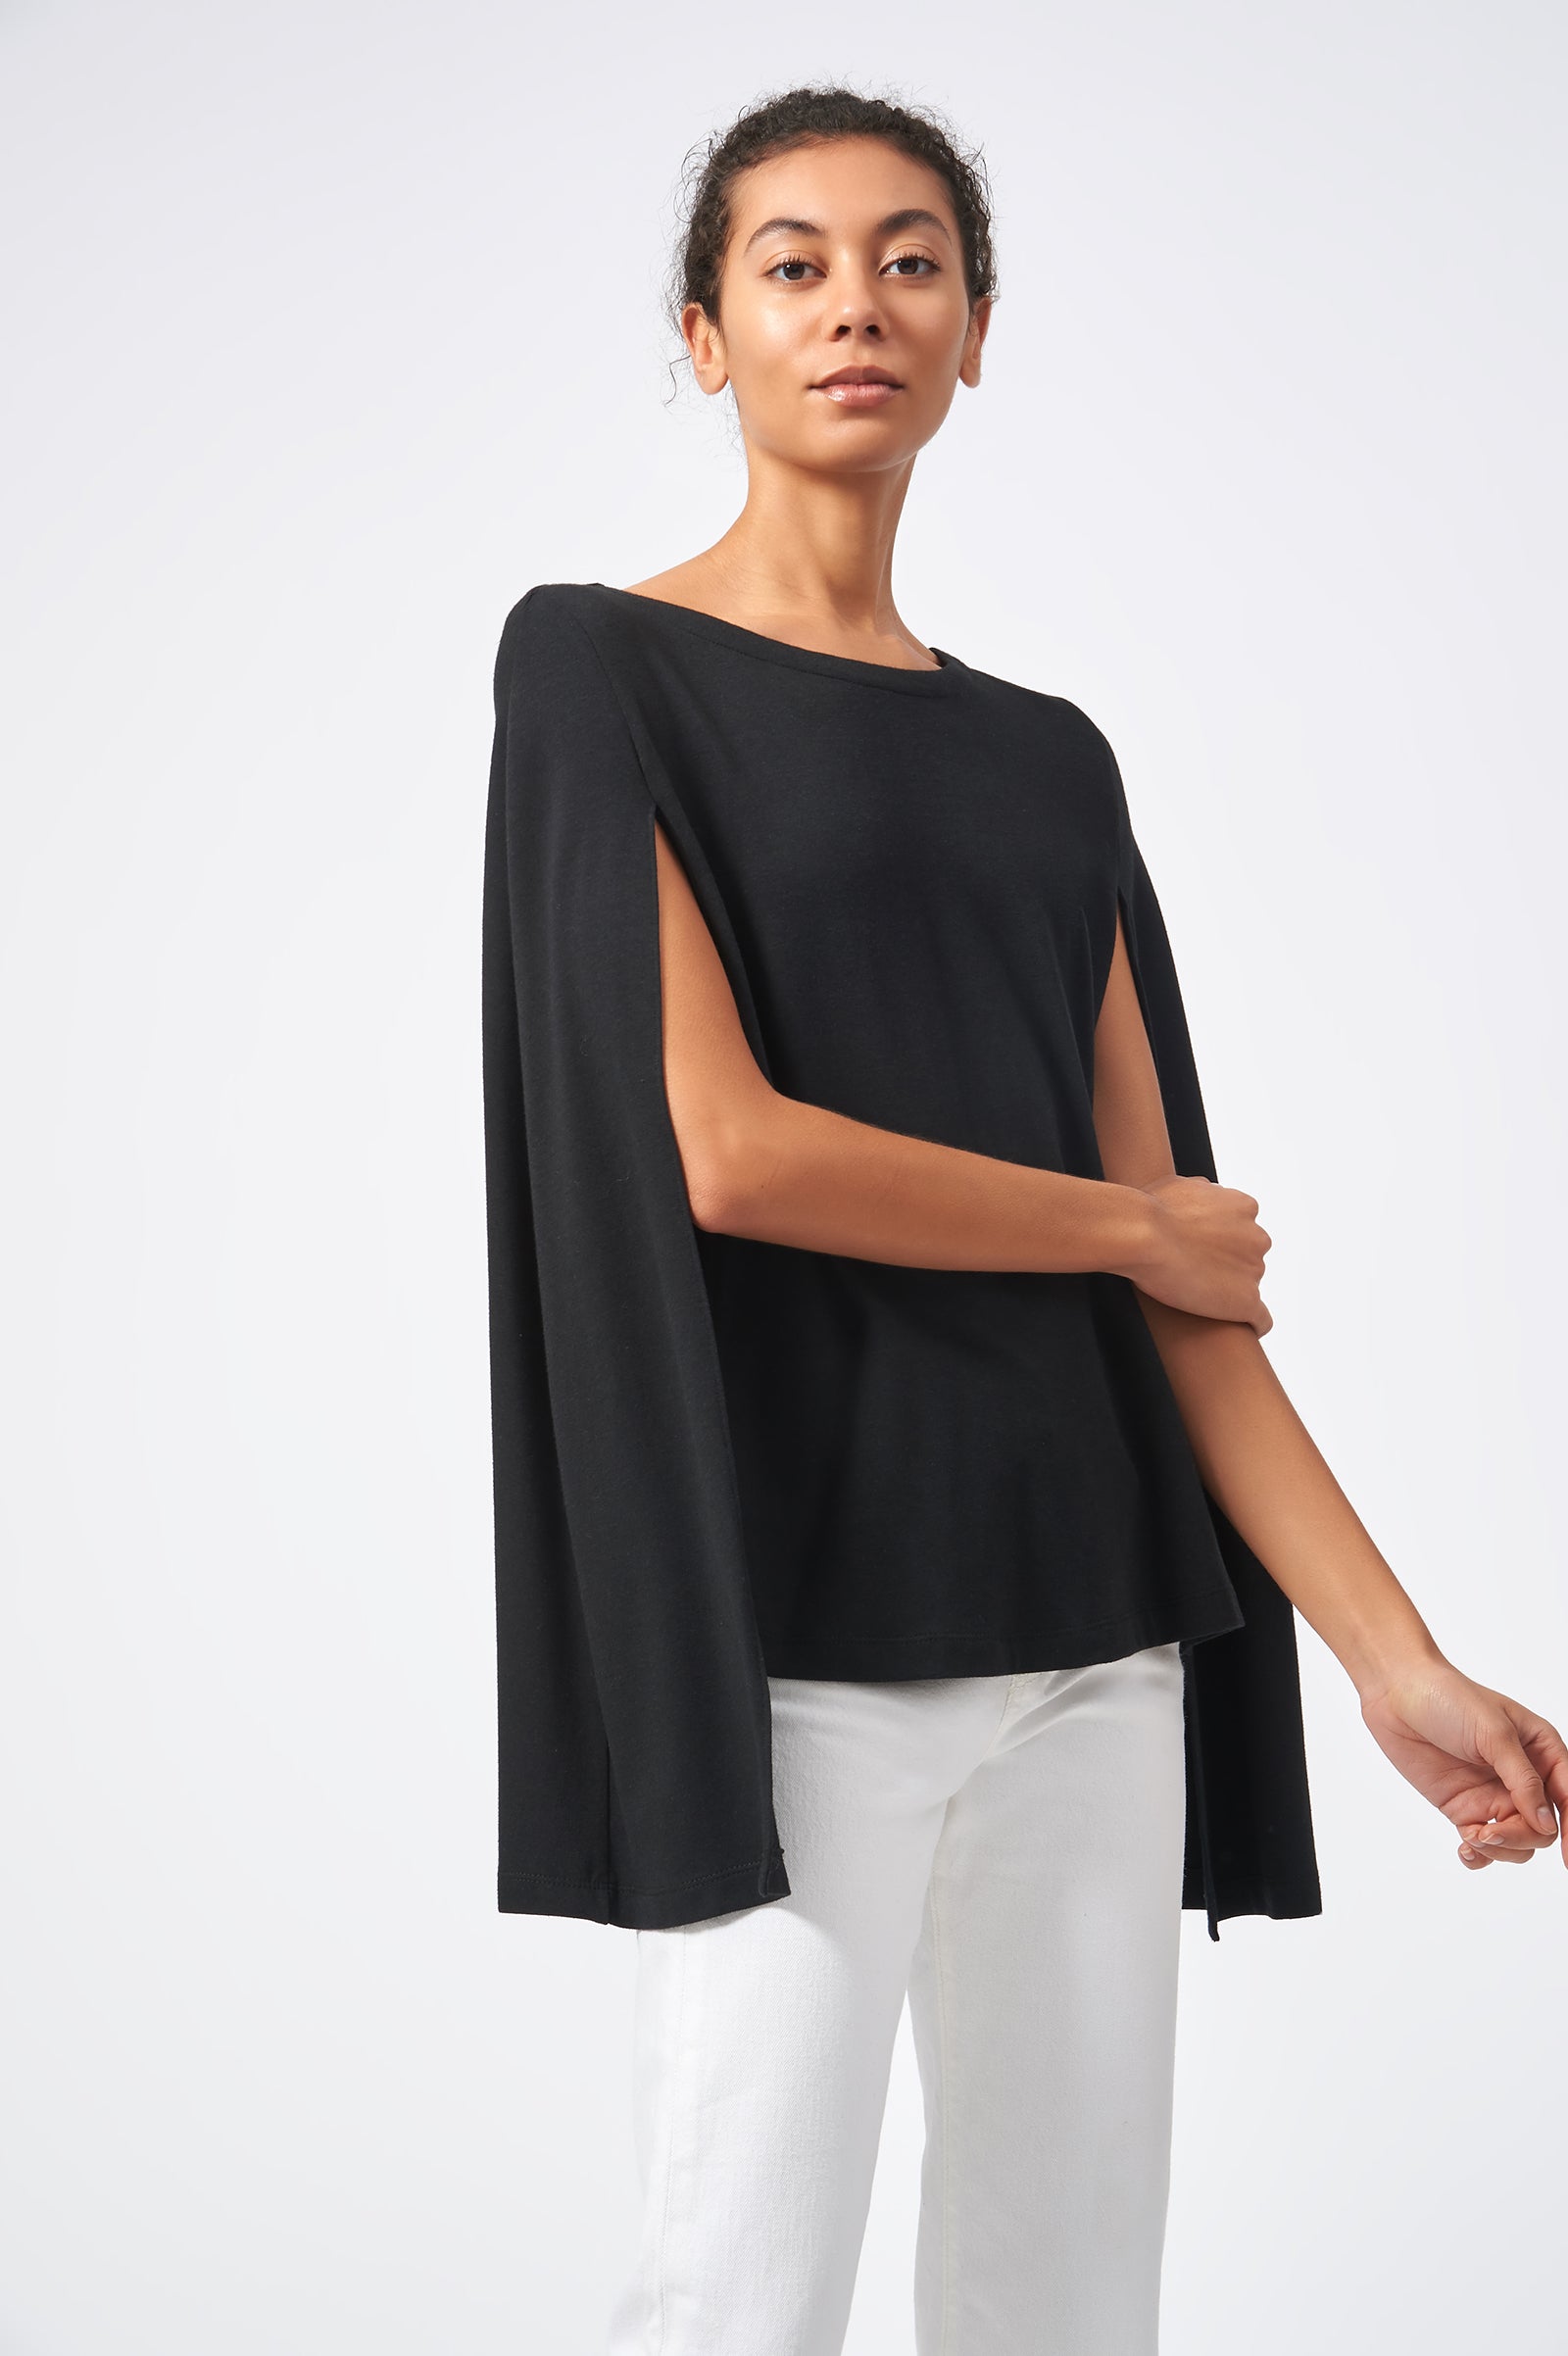 Cape Sweatshirt in Black Made from Bamboo and Cotton French Terry – KAL ...